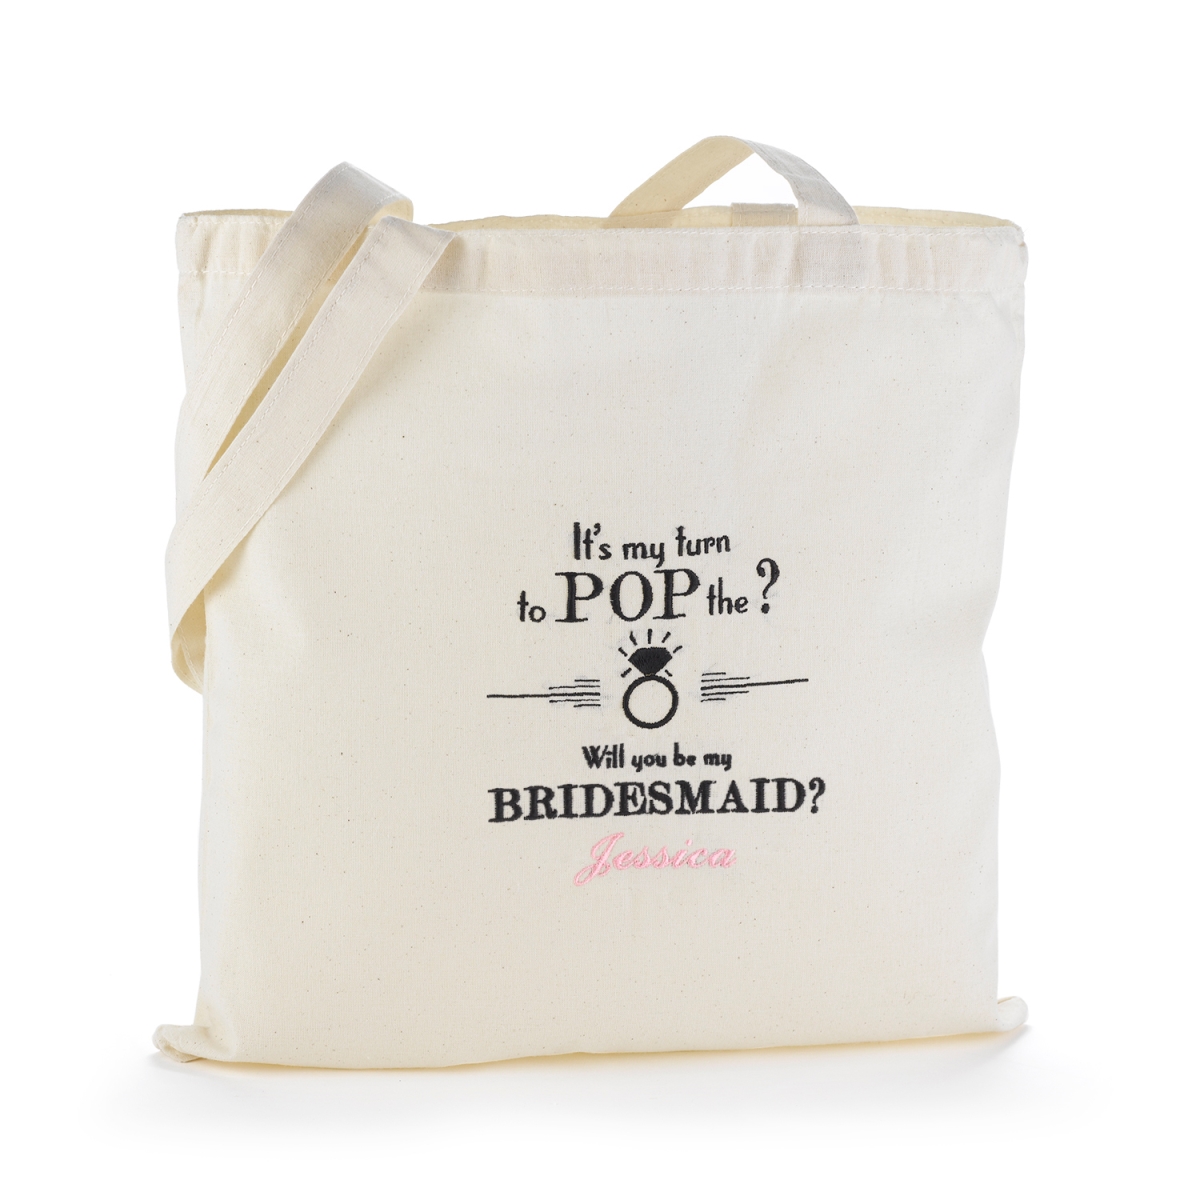 Hortense B. Hewitt 54037p Pop The Question Tote Bag - Bridesmaid - Personalized